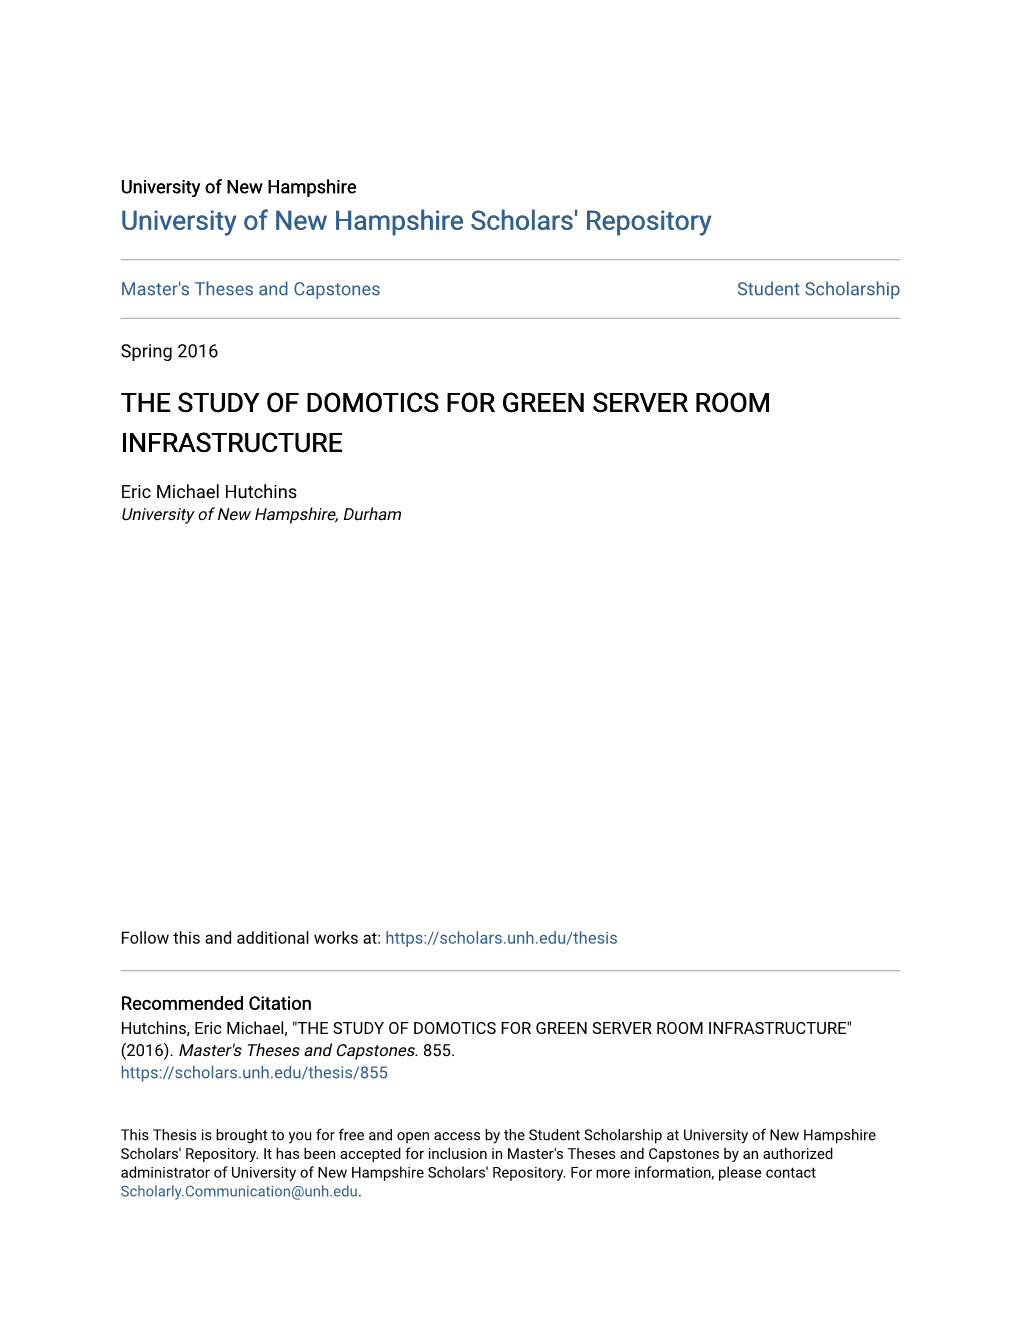 The Study of Domotics for Green Server Room Infrastructure